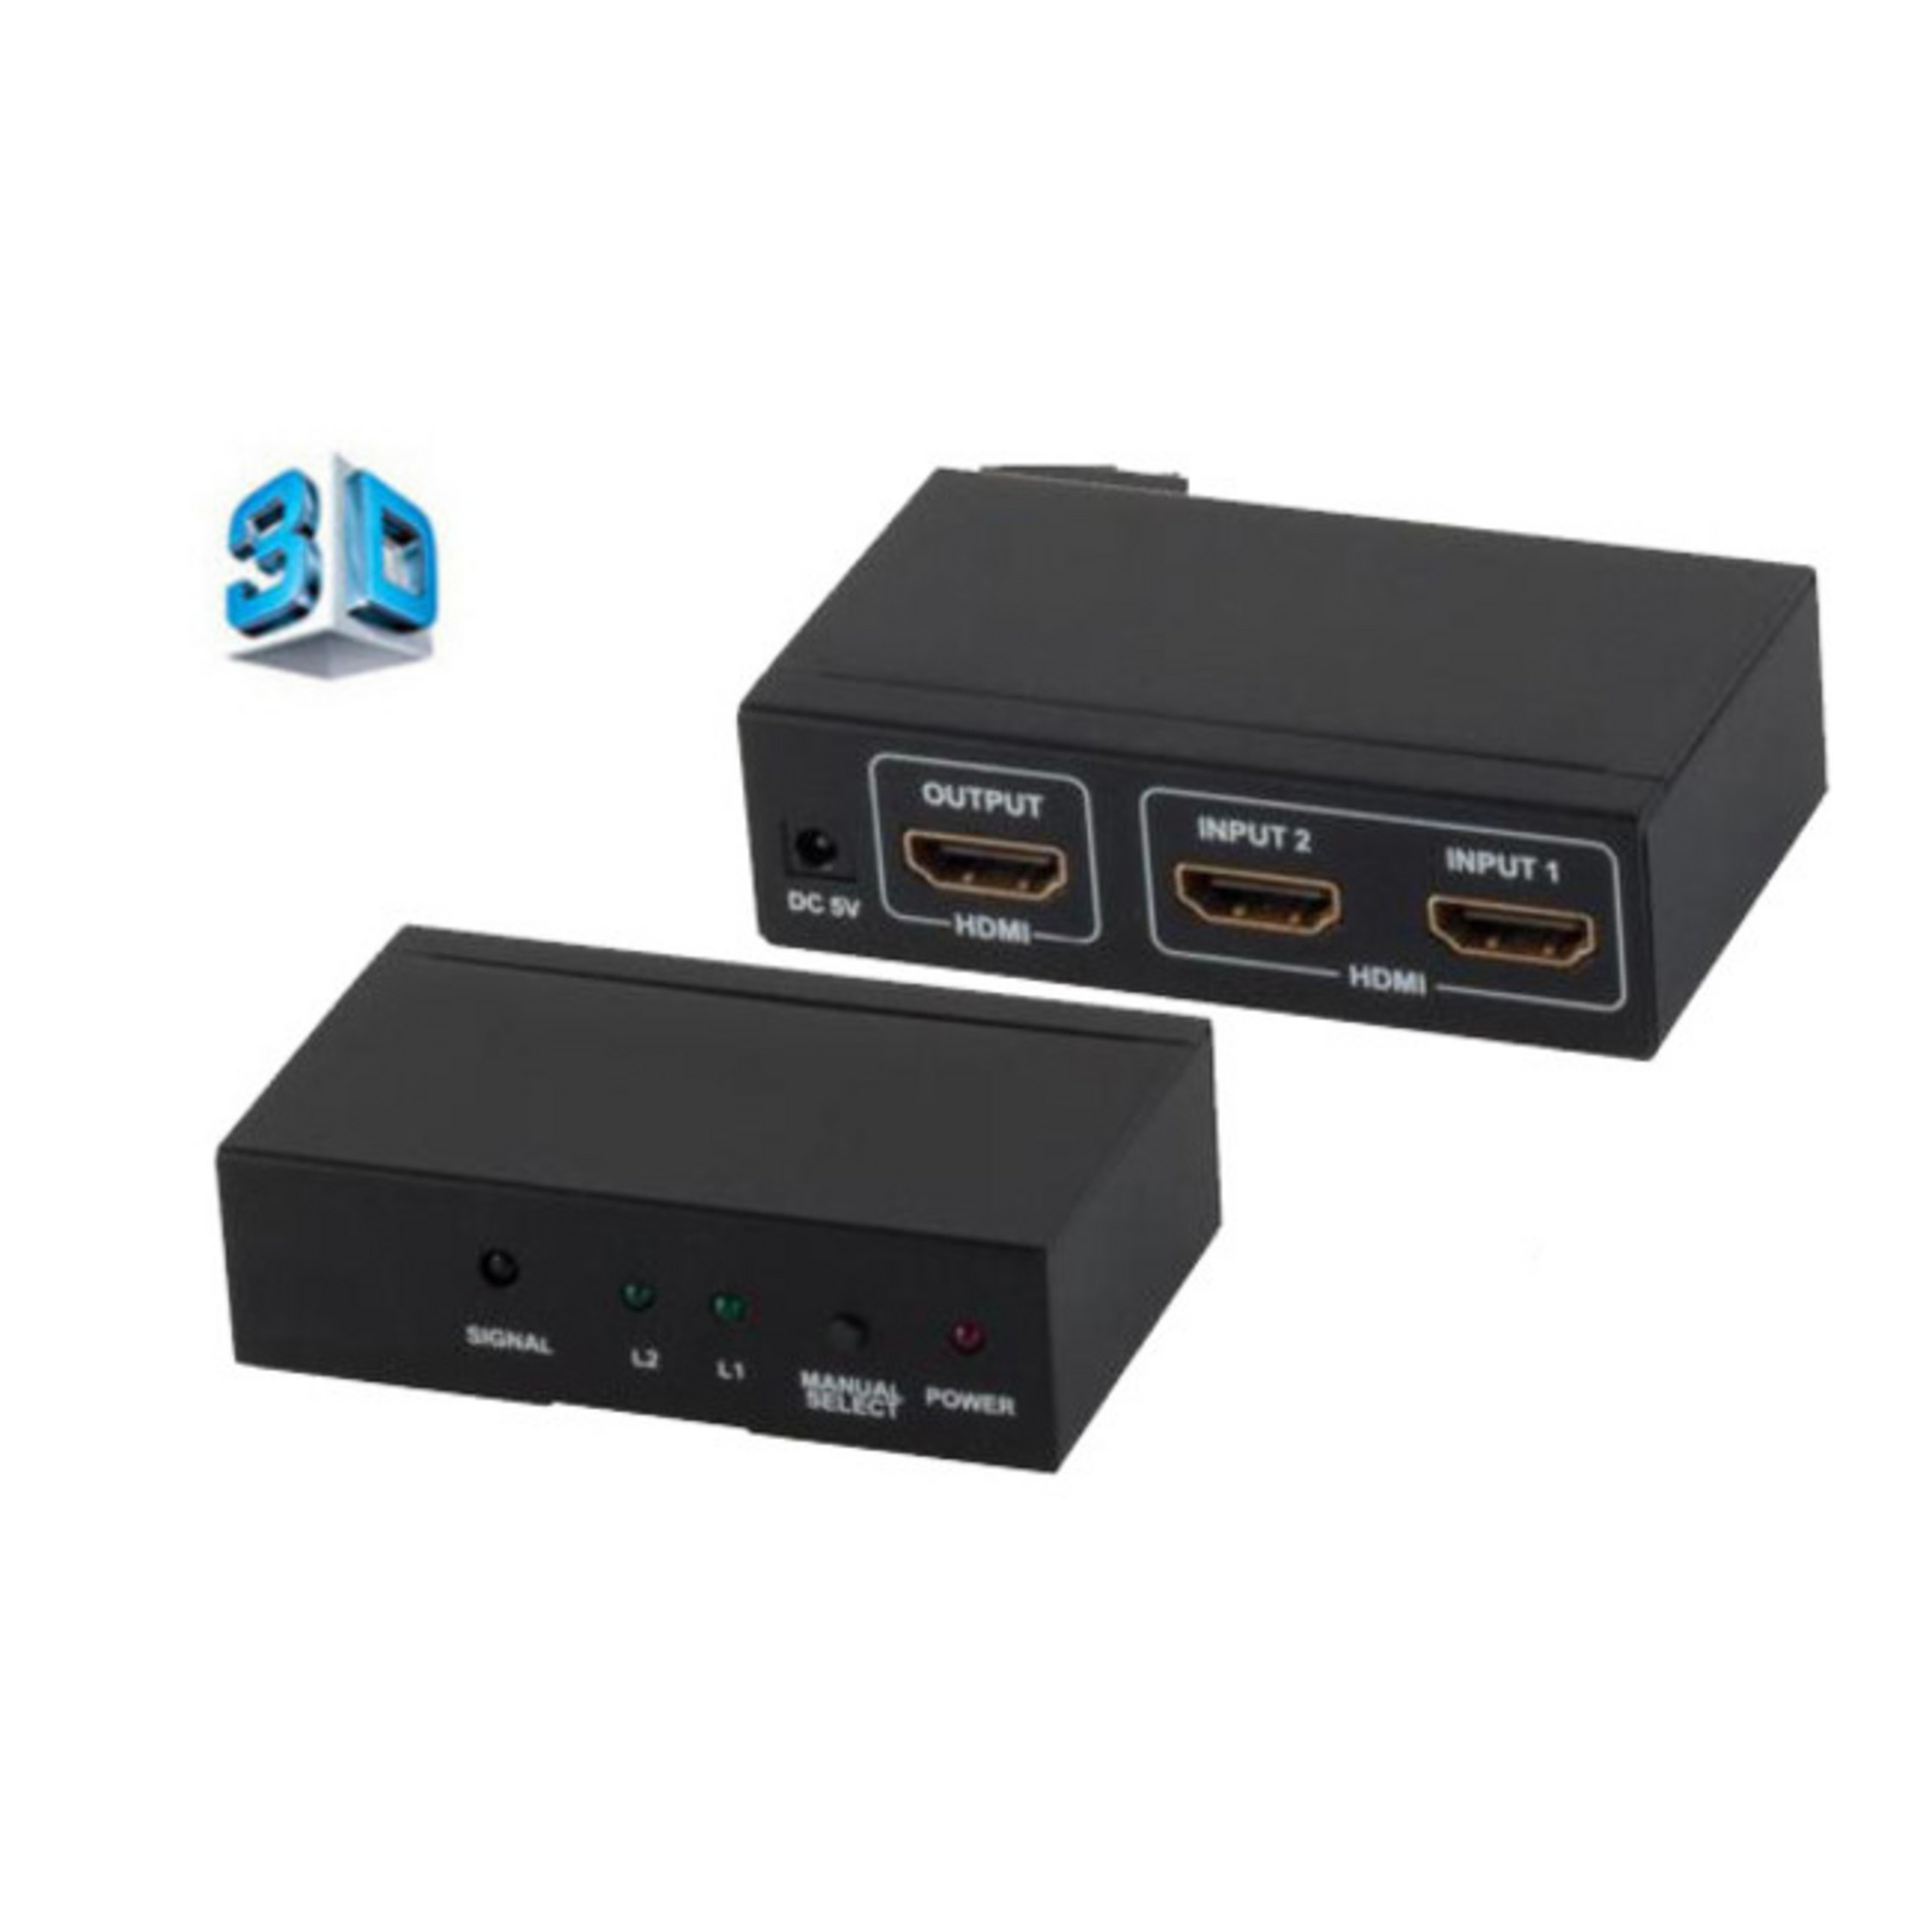 3D, VER1.4, 2x HDMI Switch SHIVERPEAKS HDMI IN 4K2K, OUT, Switch, 1x